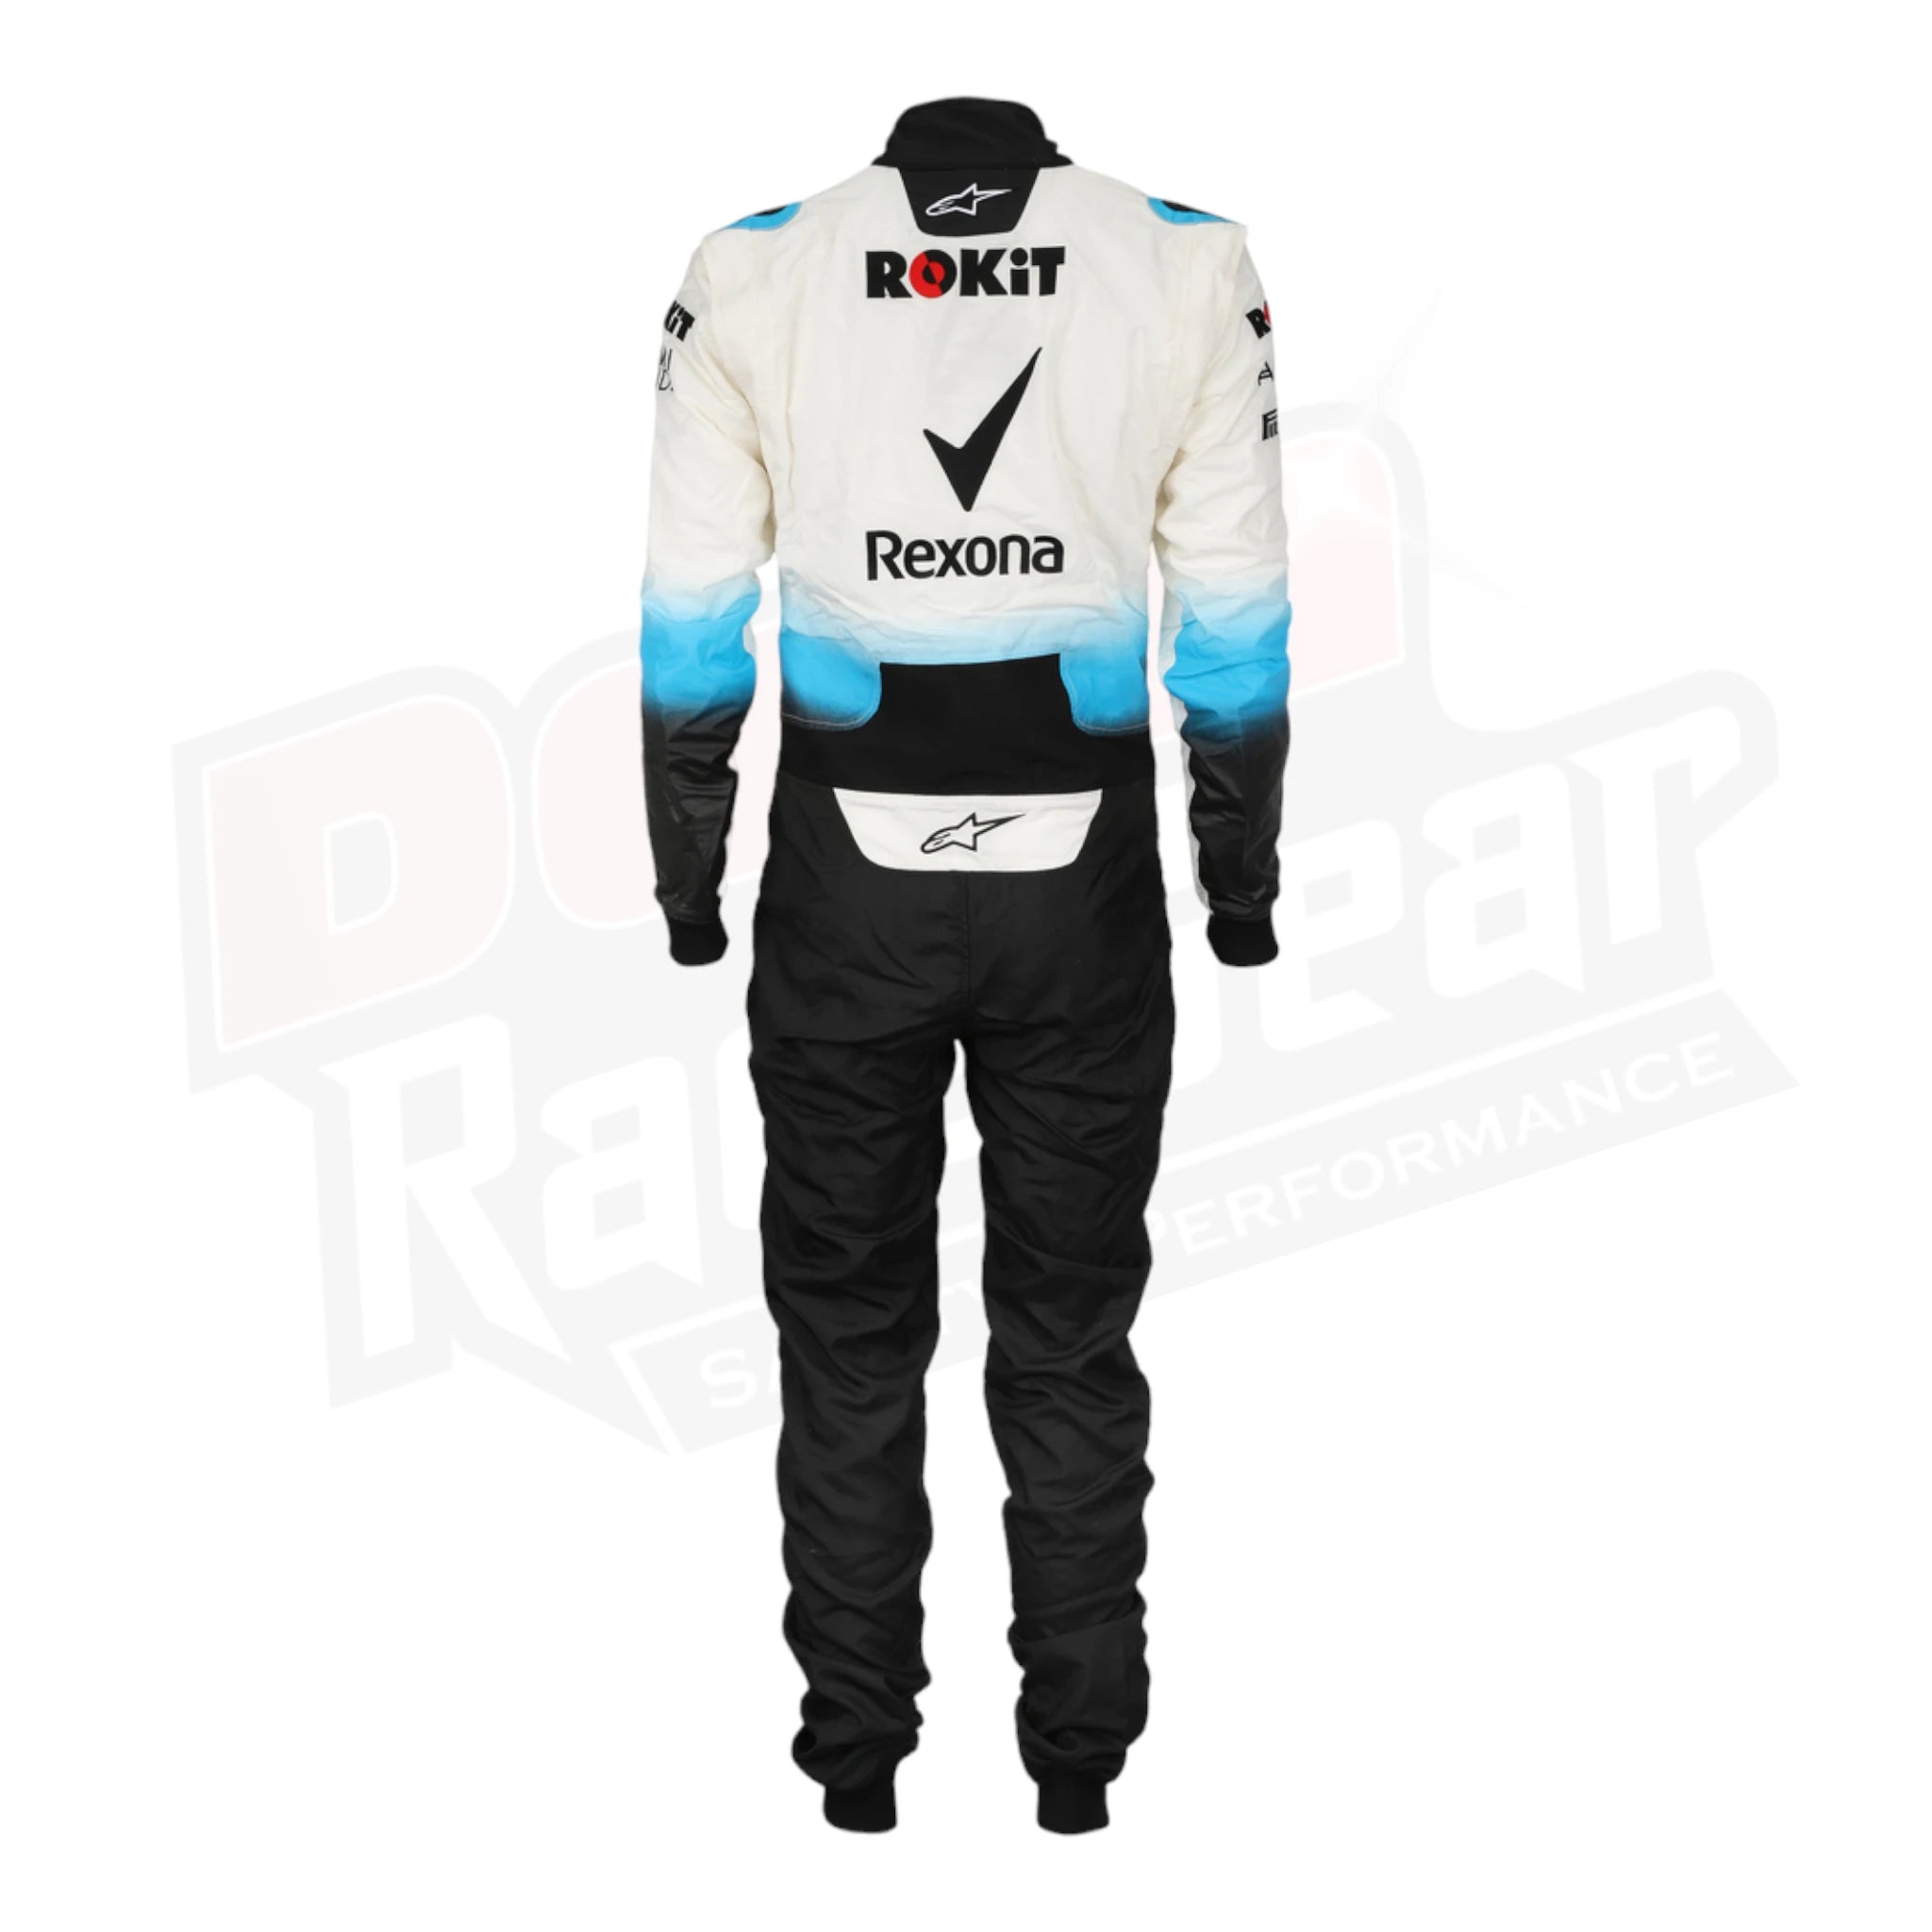 2019 George Russell Williams Racing F1 Race Suit